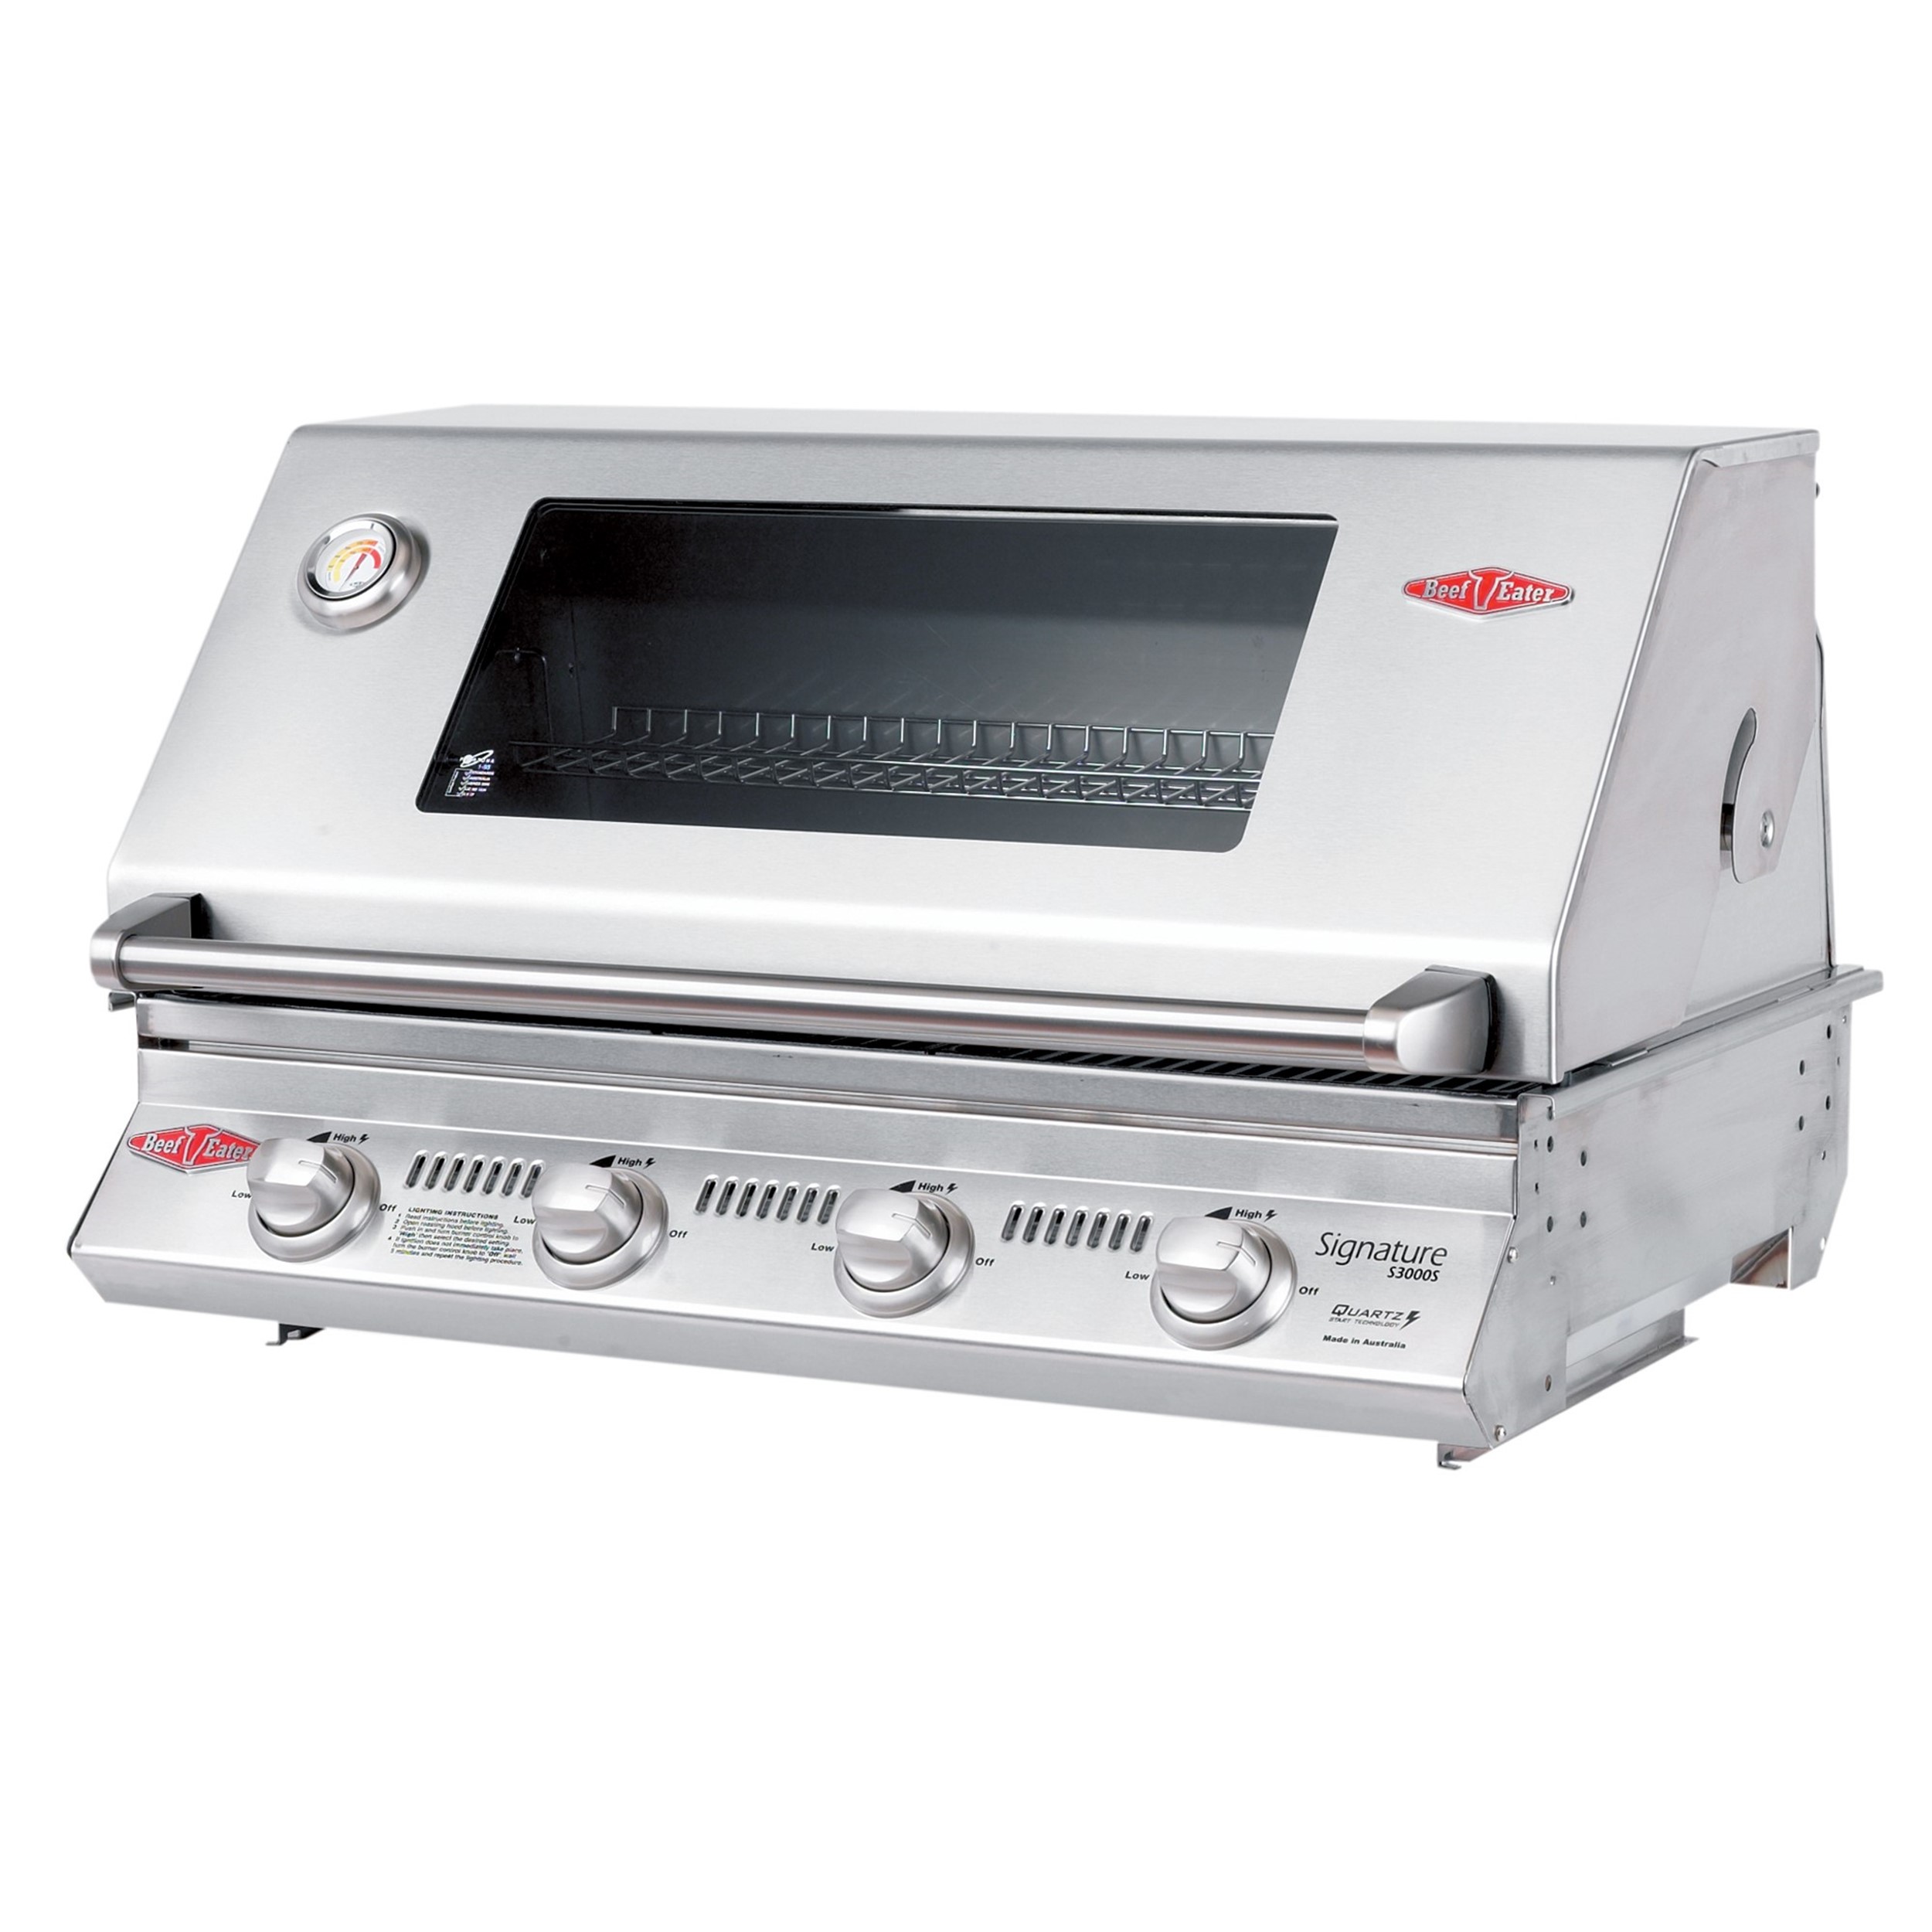 Picture of Signature 3000SS - 4 Burner + Cook Top